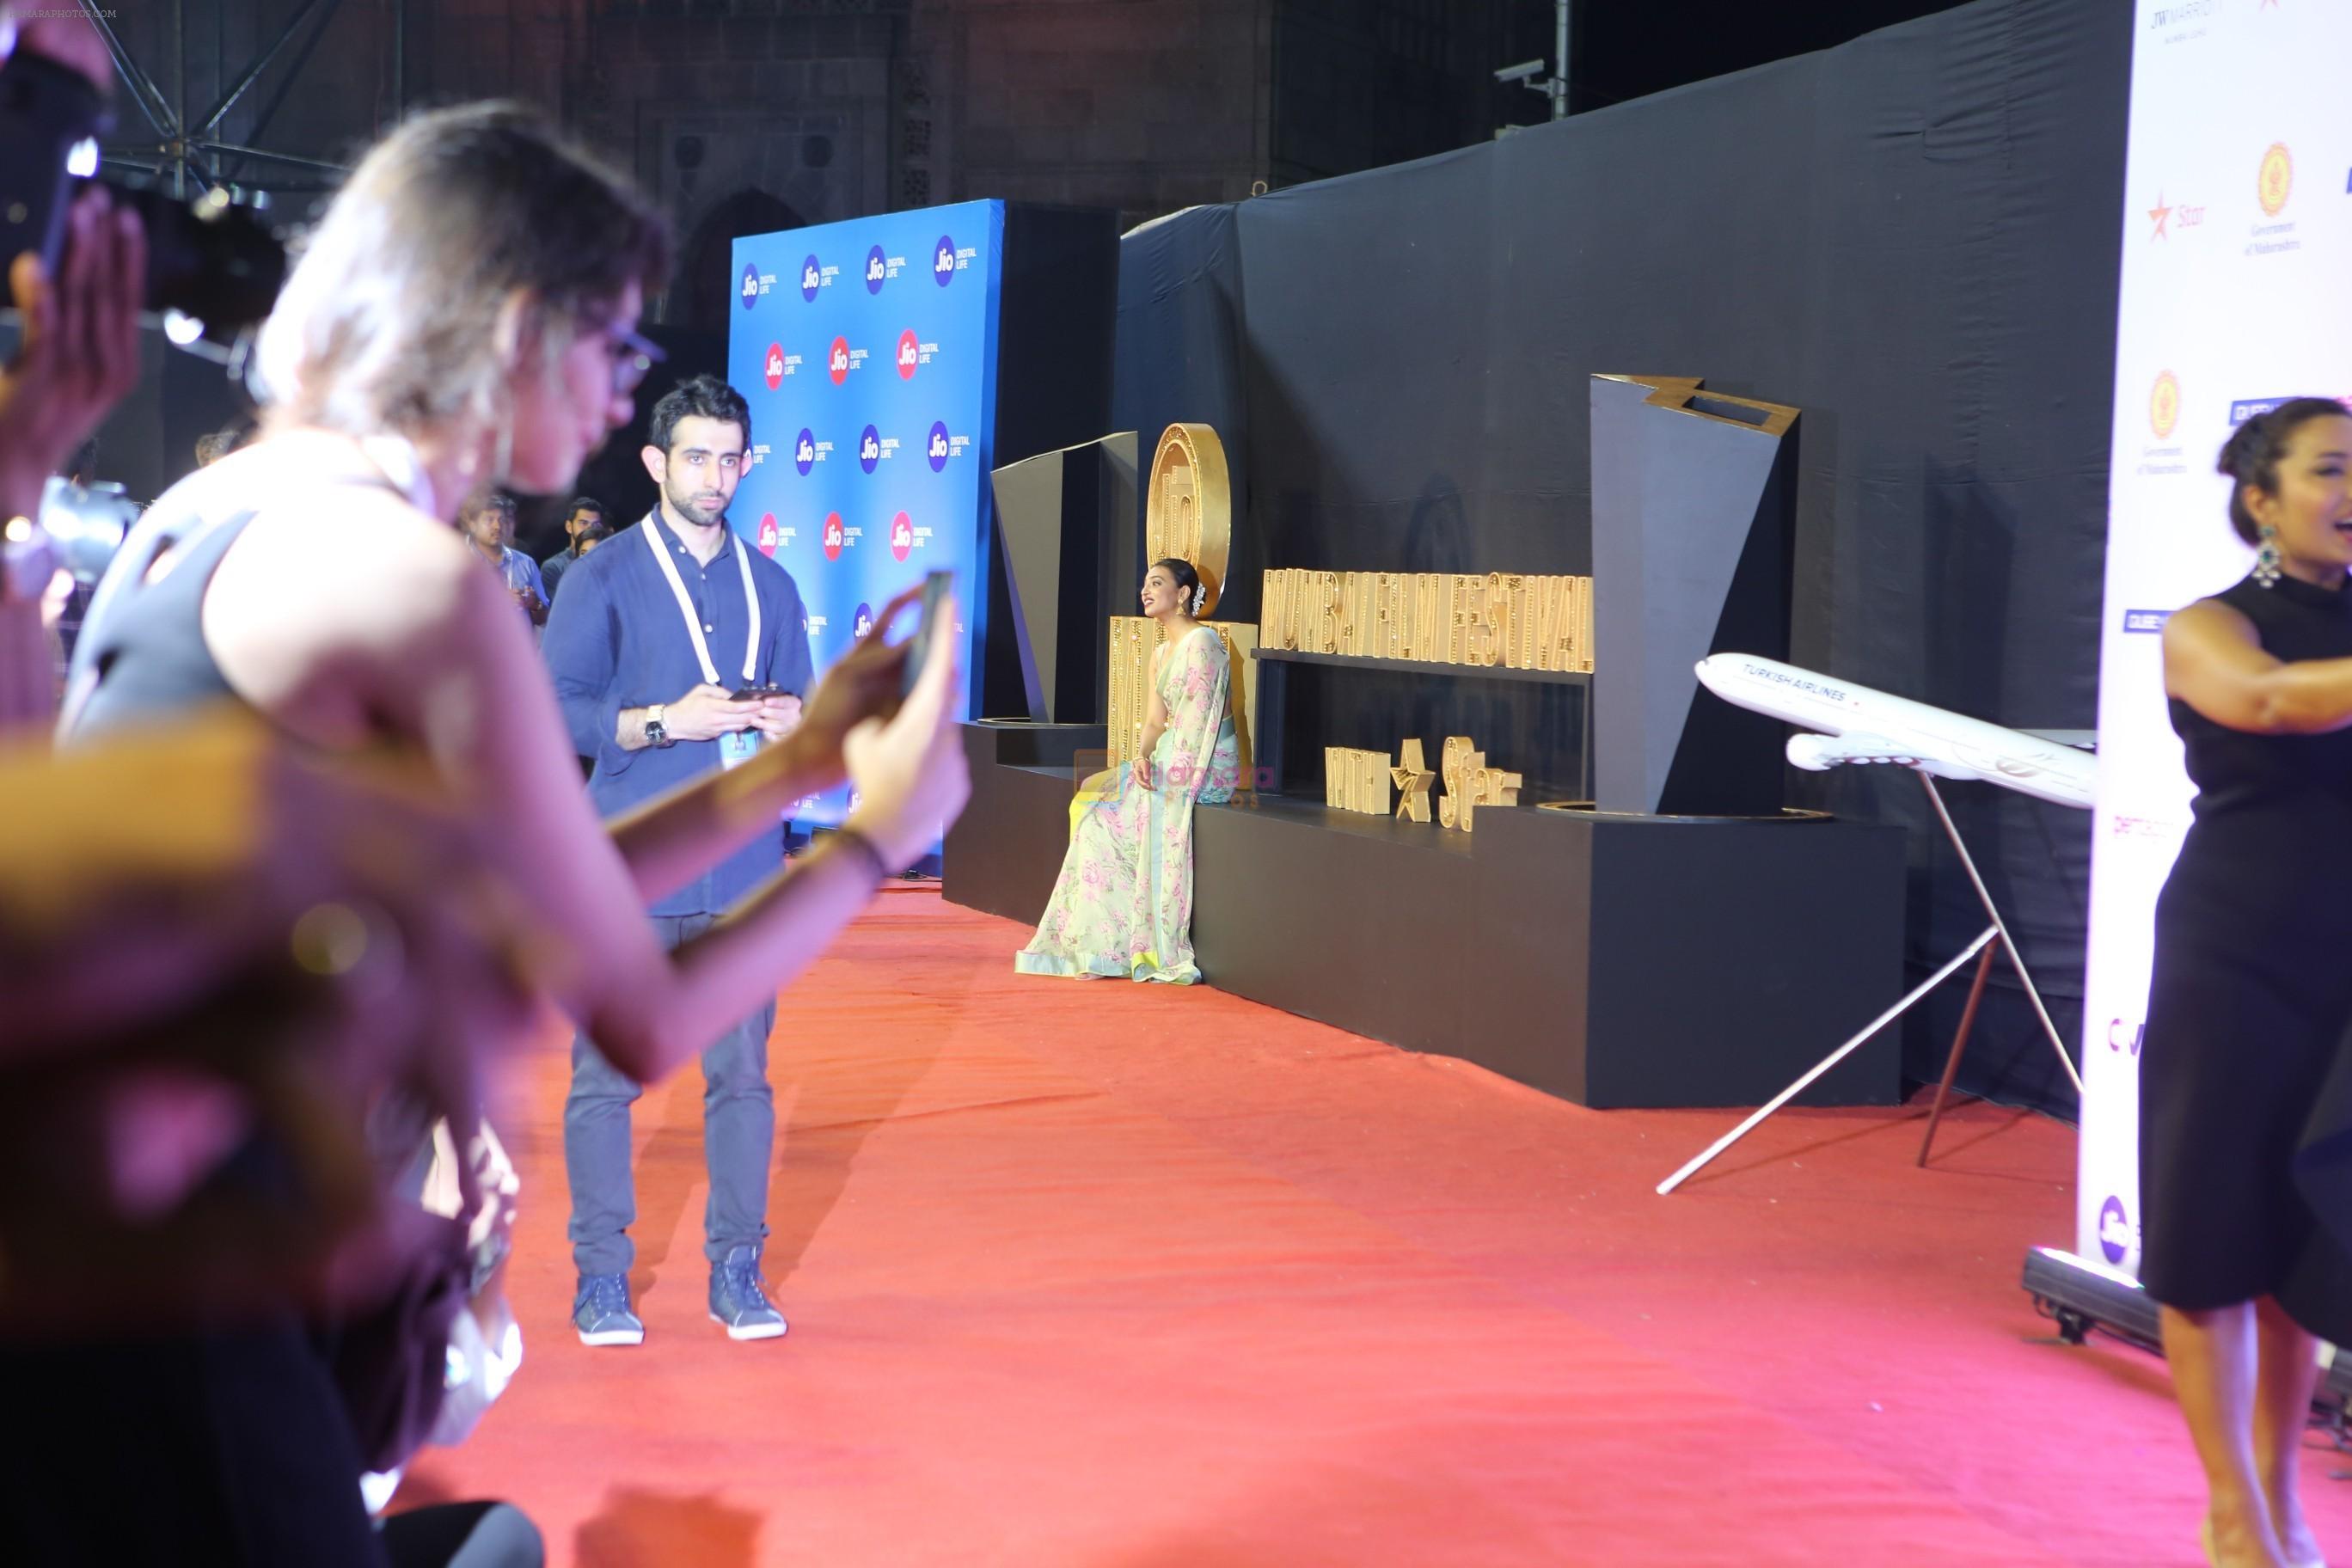 Radhika Apte at the Opening ceremony of Mami film festival in Gateway of India on 25th Oct 2018